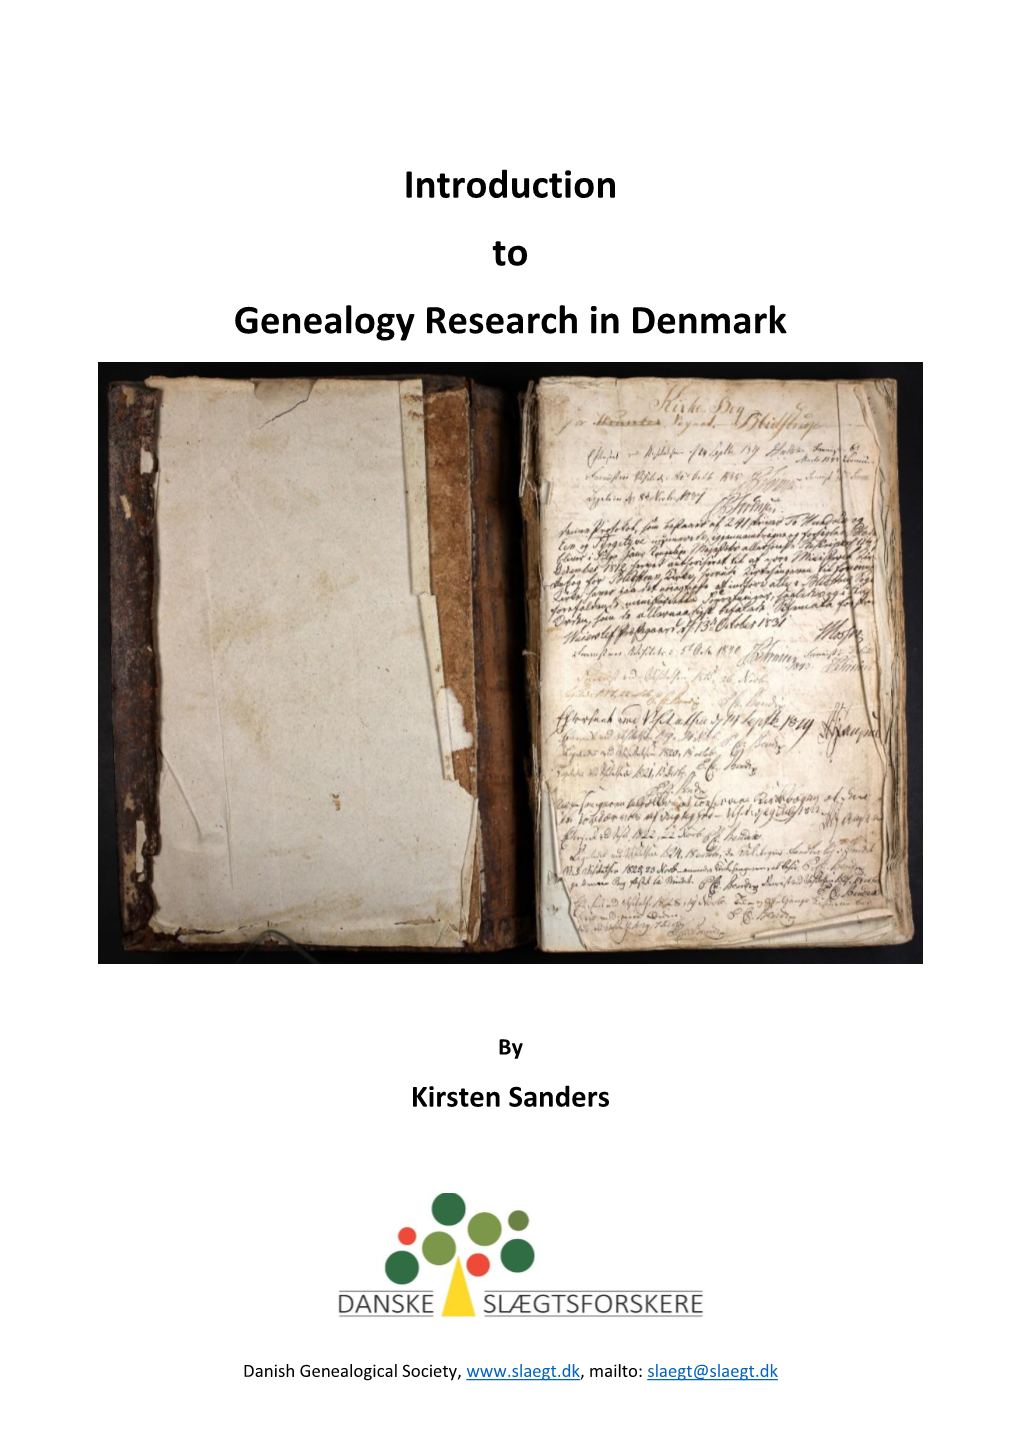 Introduction to Genealogy Research in Denmark